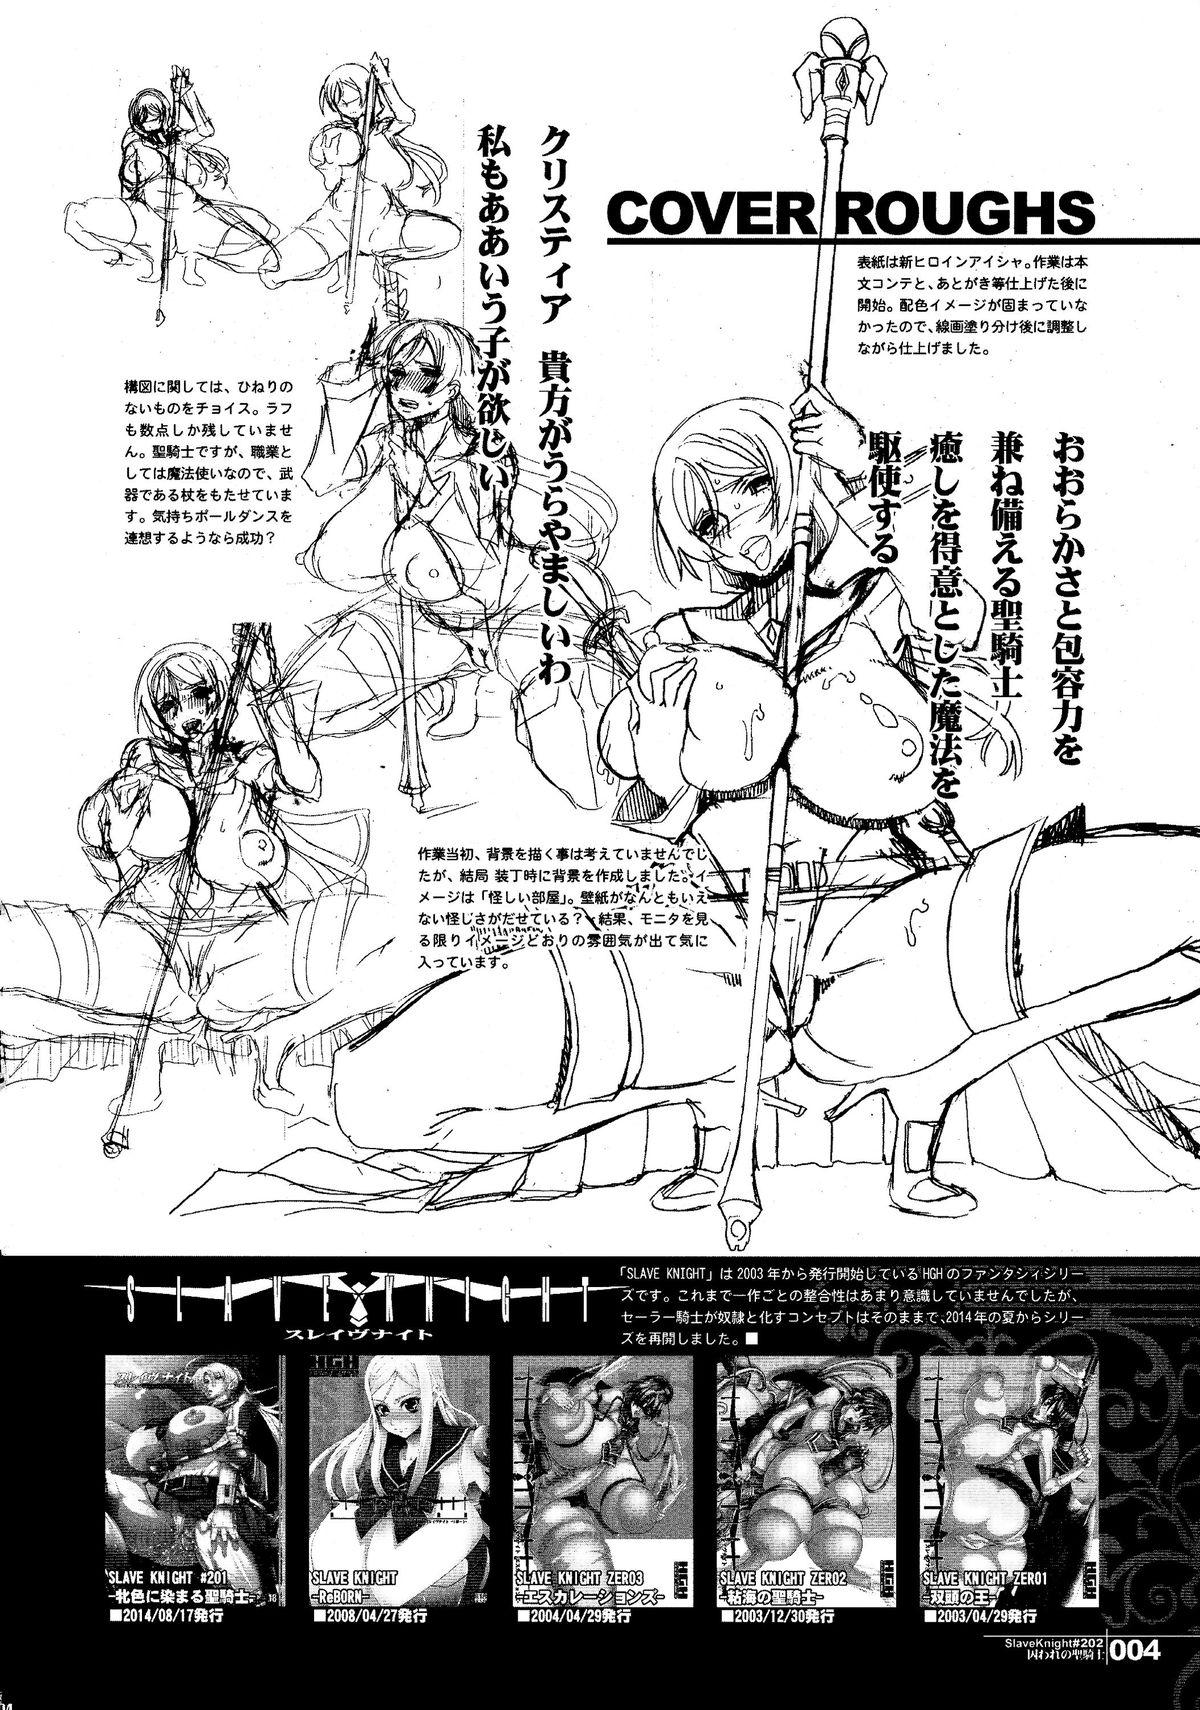 Sharing Slave Knight #202 Rough Porn - Page 4